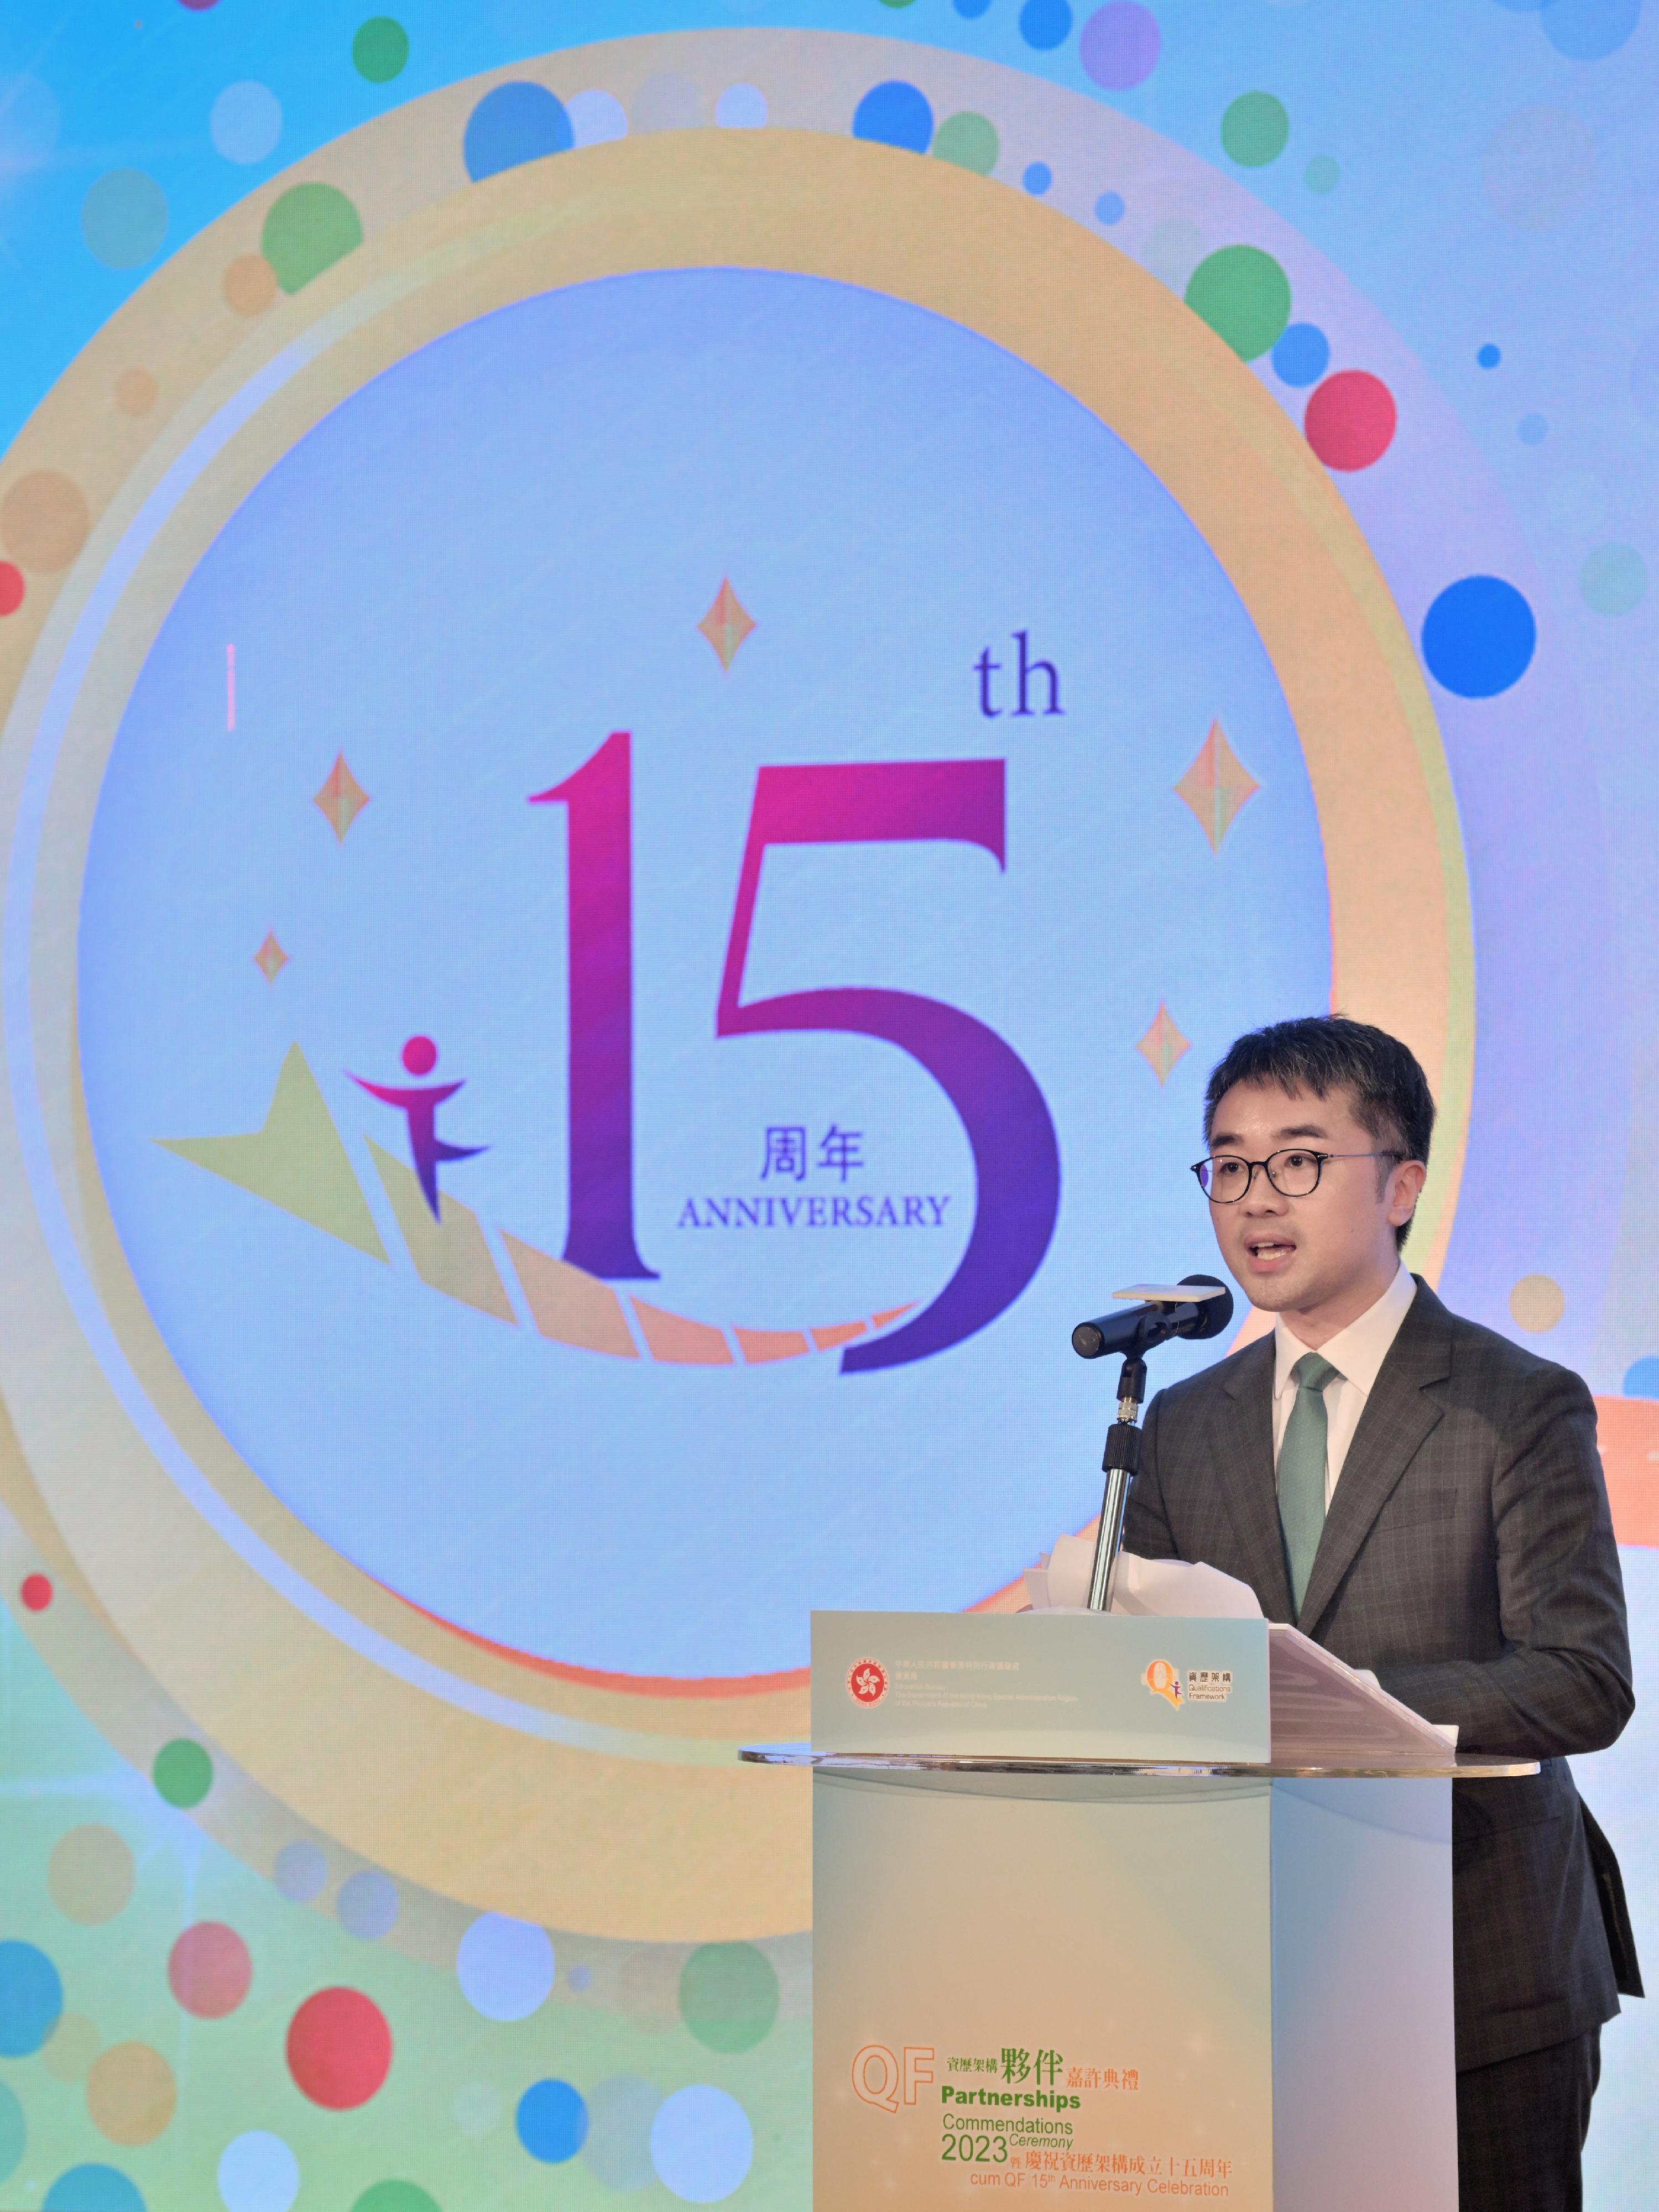 The Acting Secretary for Education, Mr Sze Chun-fai, speaks at the Qualifications Framework (QF) Partnerships Commendation Ceremony cum QF 15th Anniversary Celebration today (May 10).
